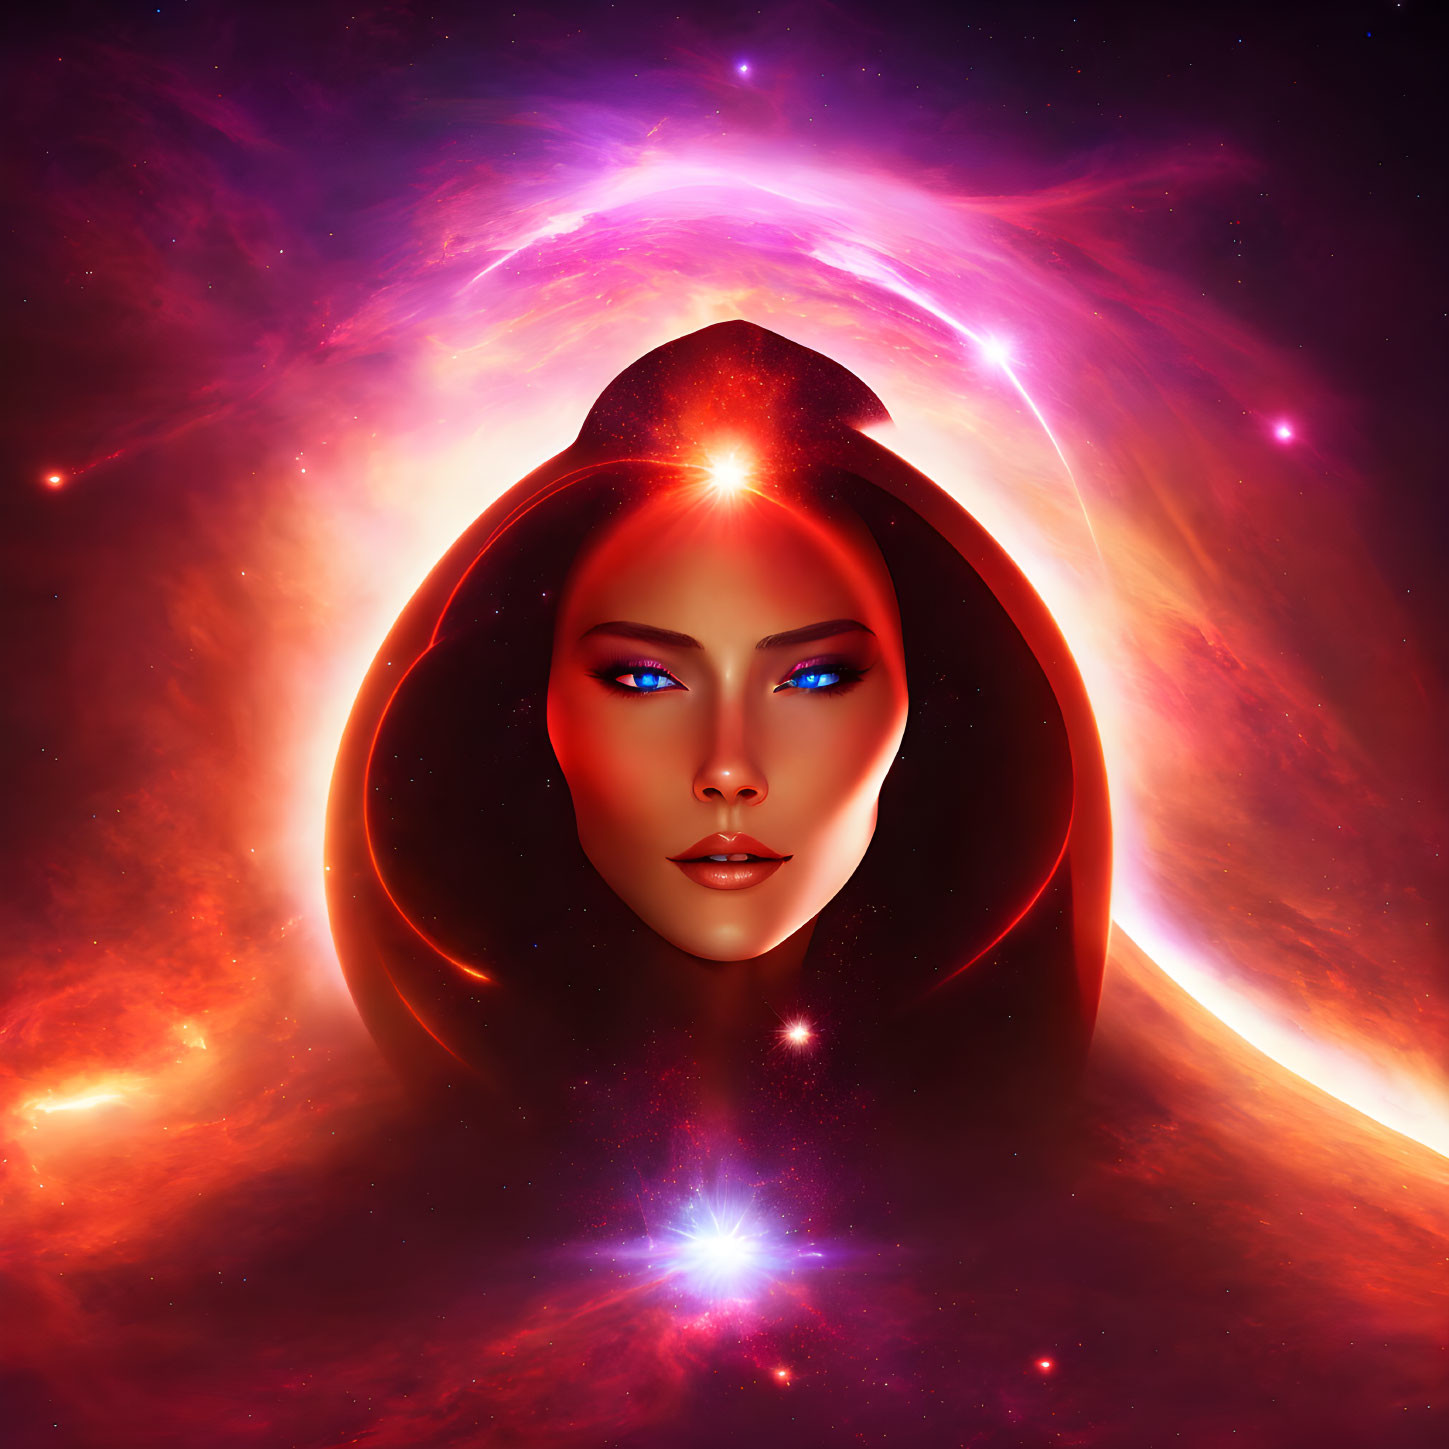 Cosmic digital artwork of a woman's face with nebula and stars